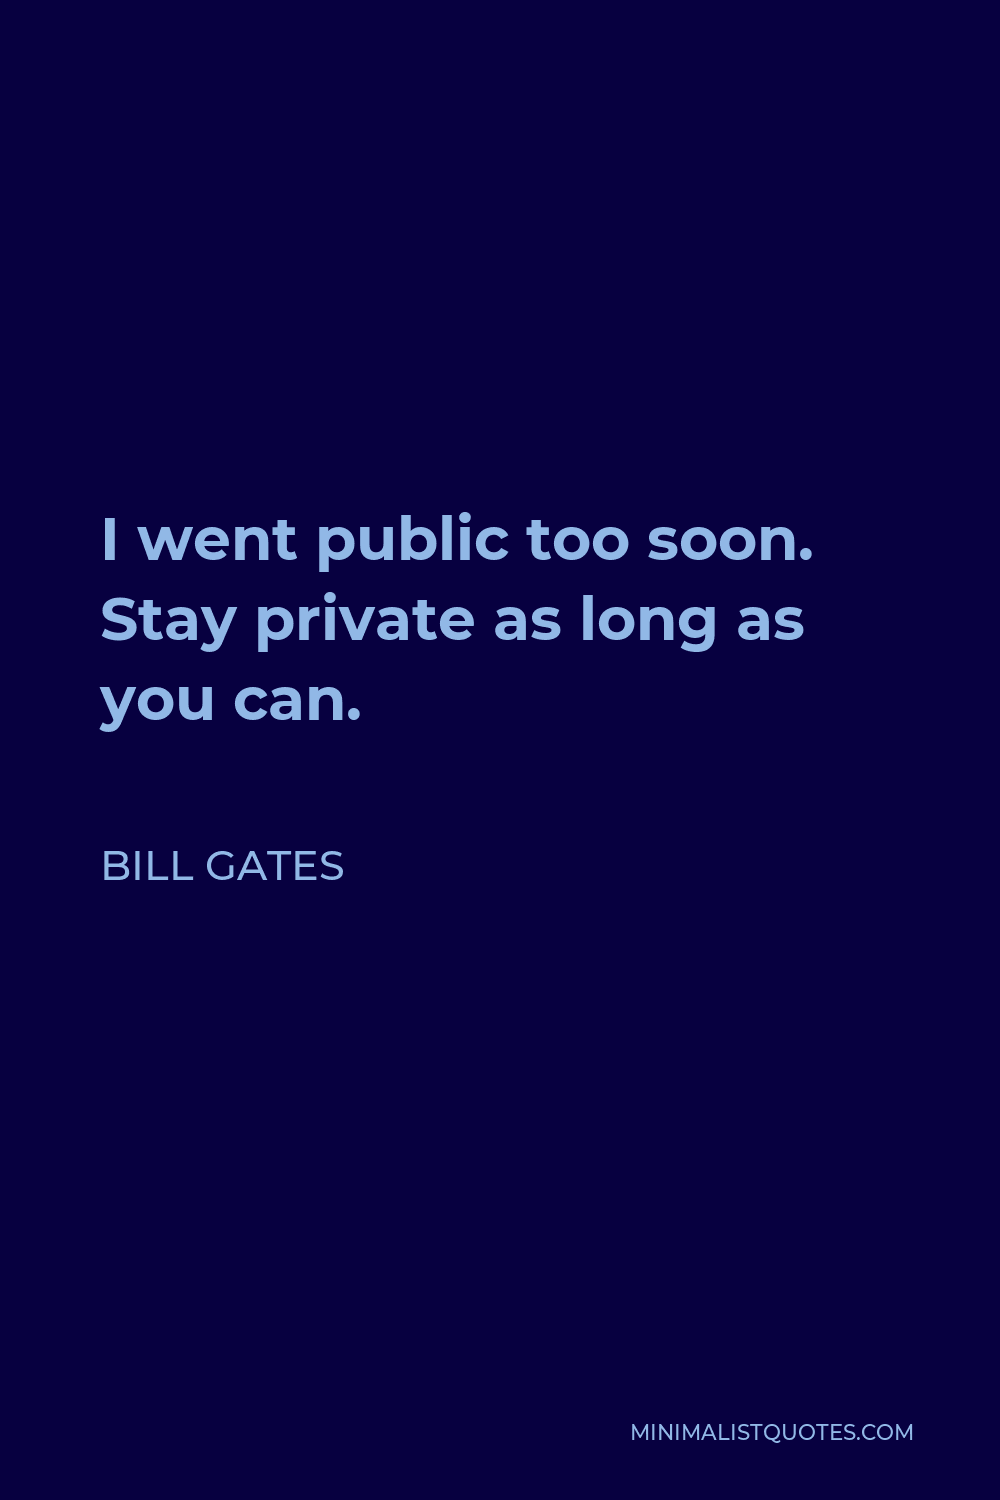 Bill Gates Quote - I went public too soon. Stay private as long as you can.